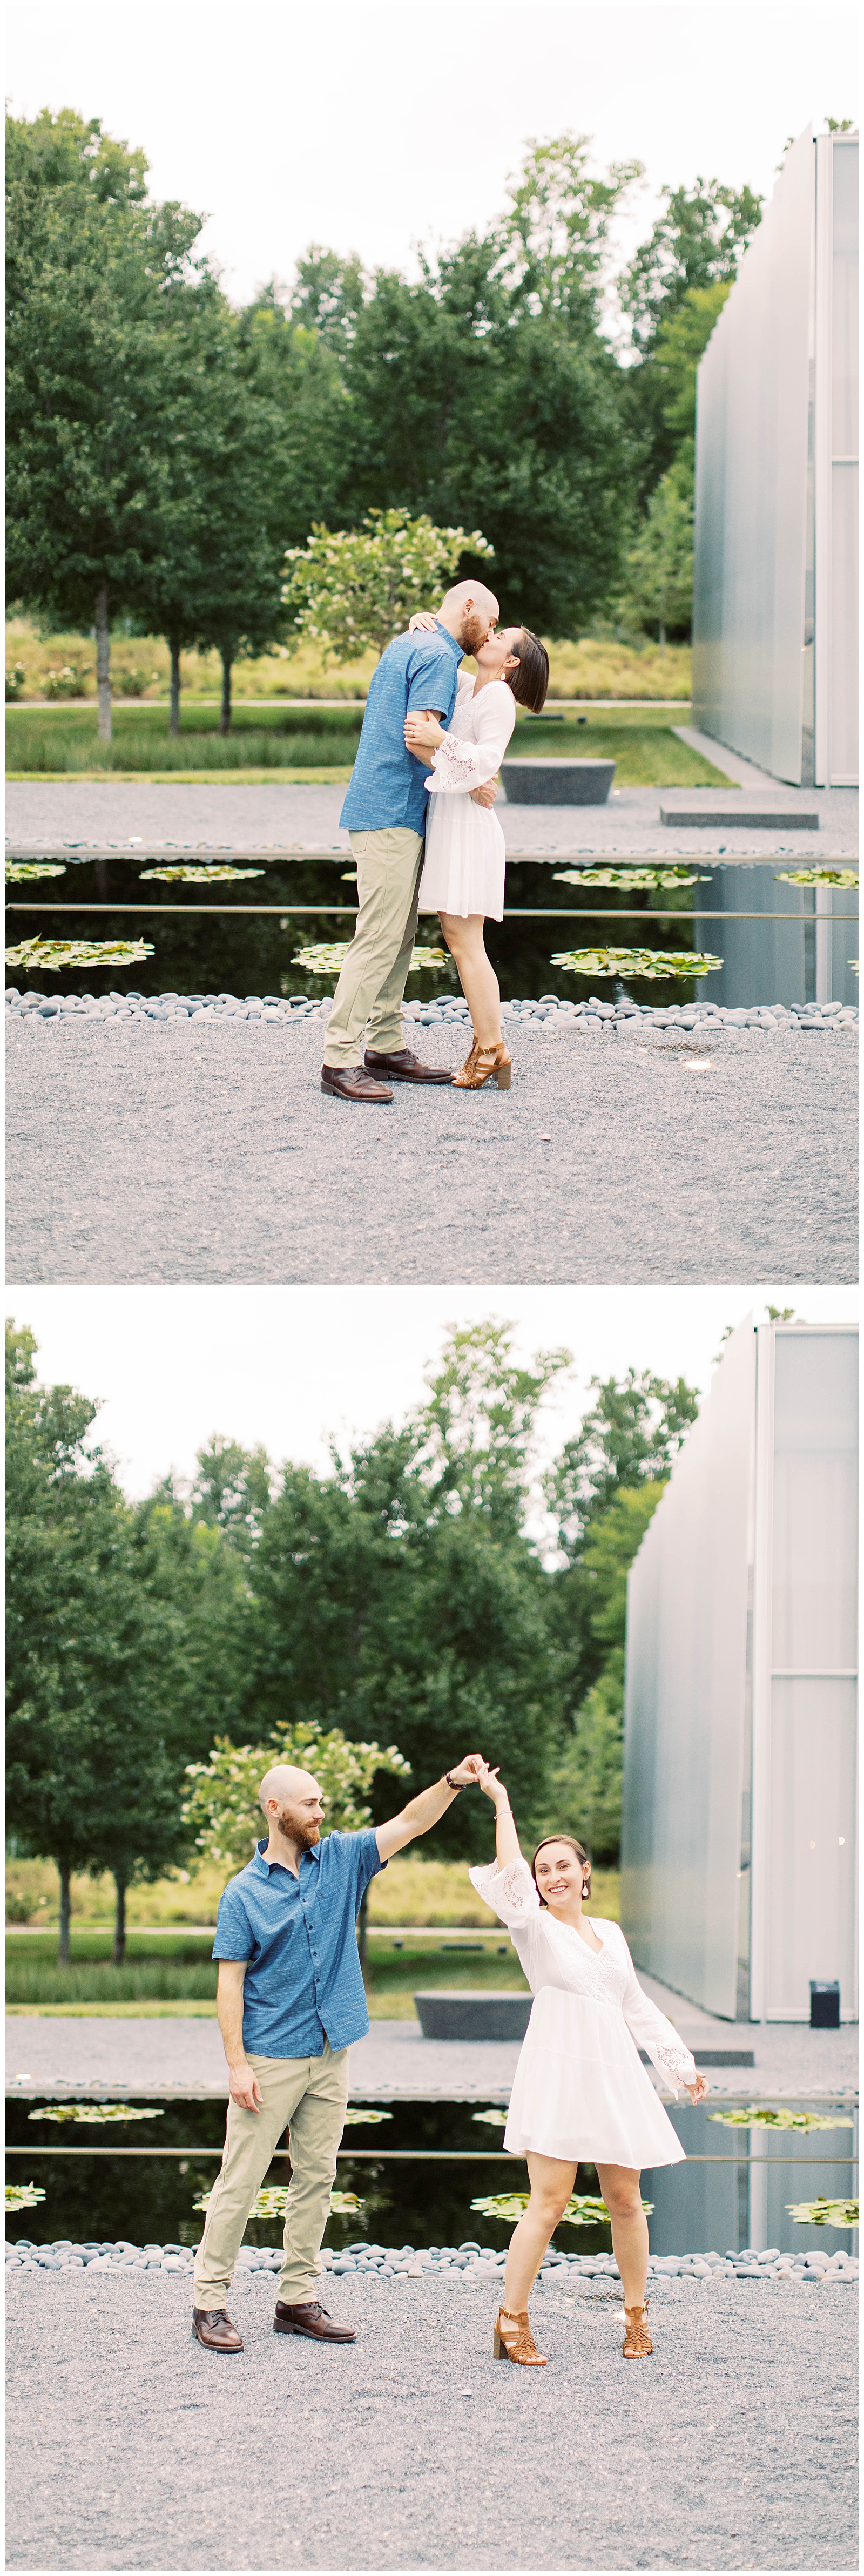 engagement session in raleigh north carolina at the museum of art